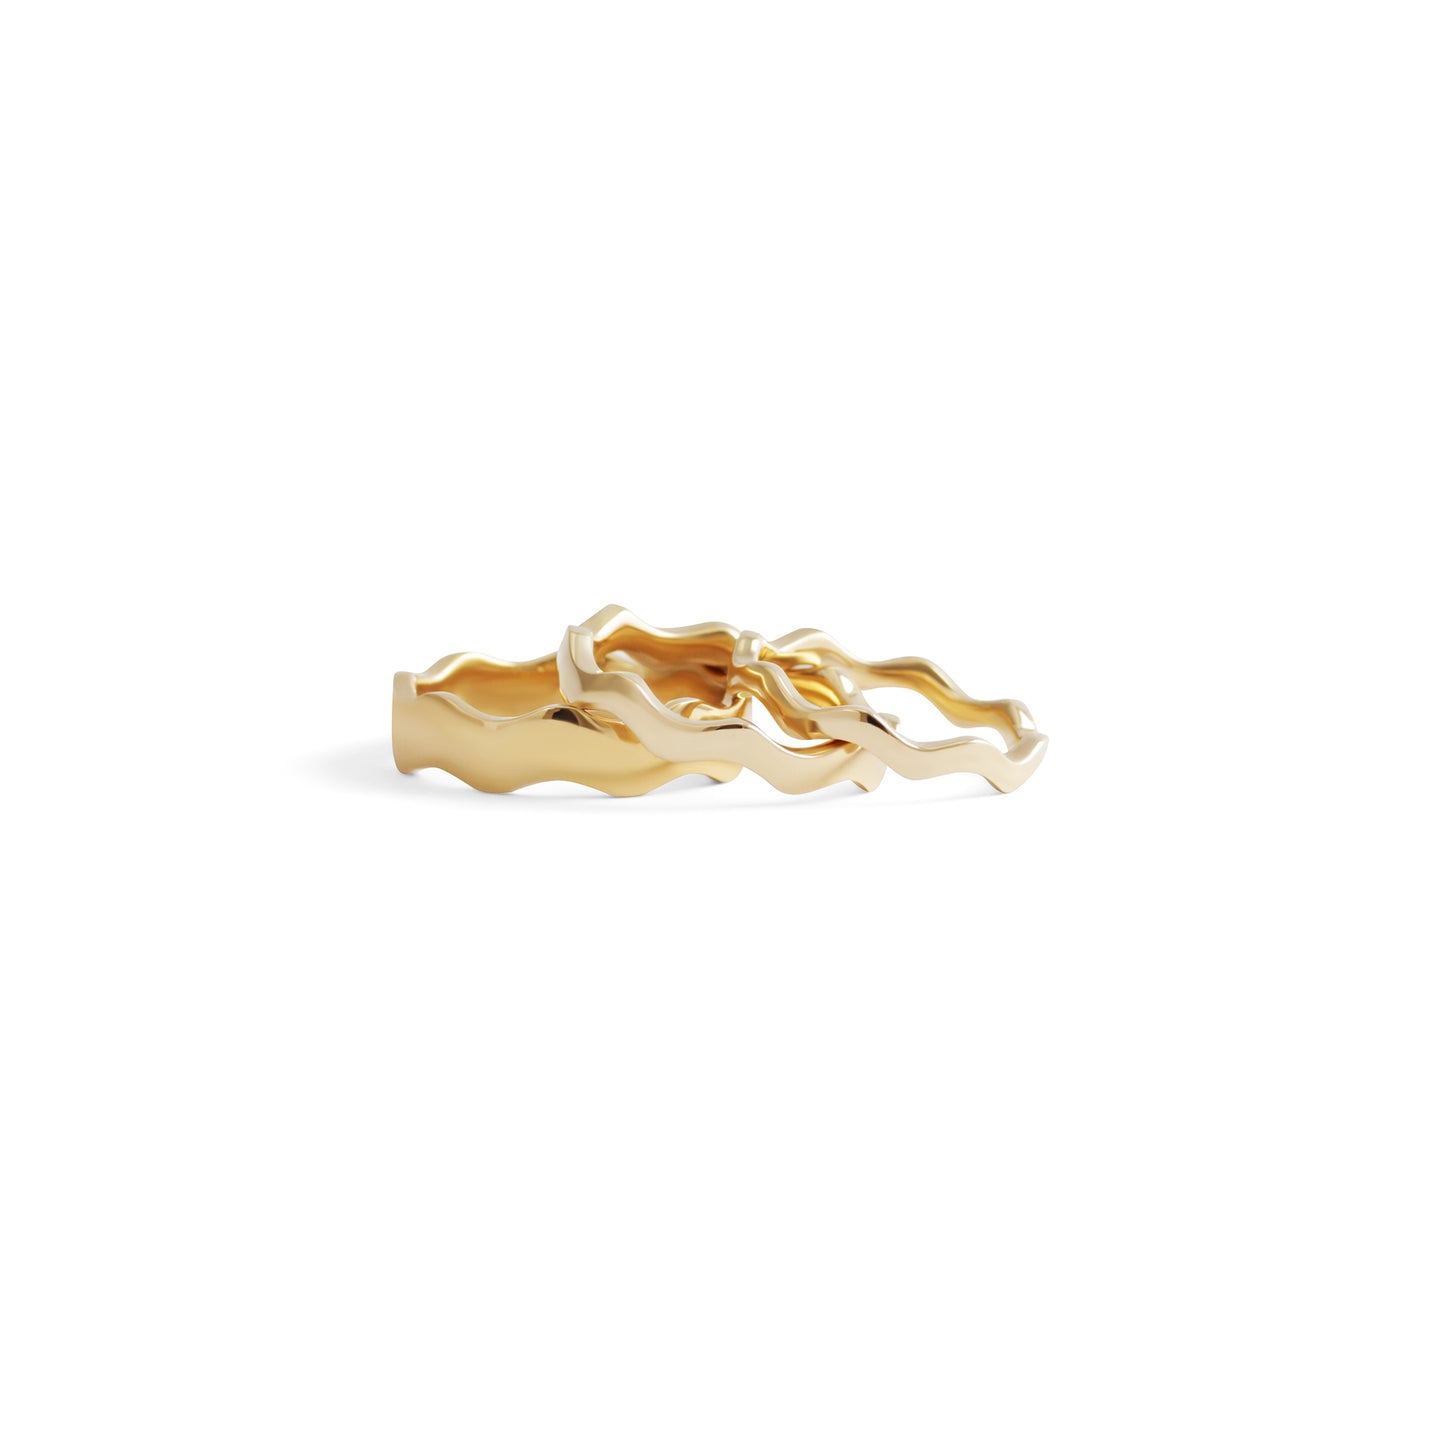 Waves Ring Standard / Gold - Goldpoint Studio - Greenpoint, Brooklyn - Fine Jewelry